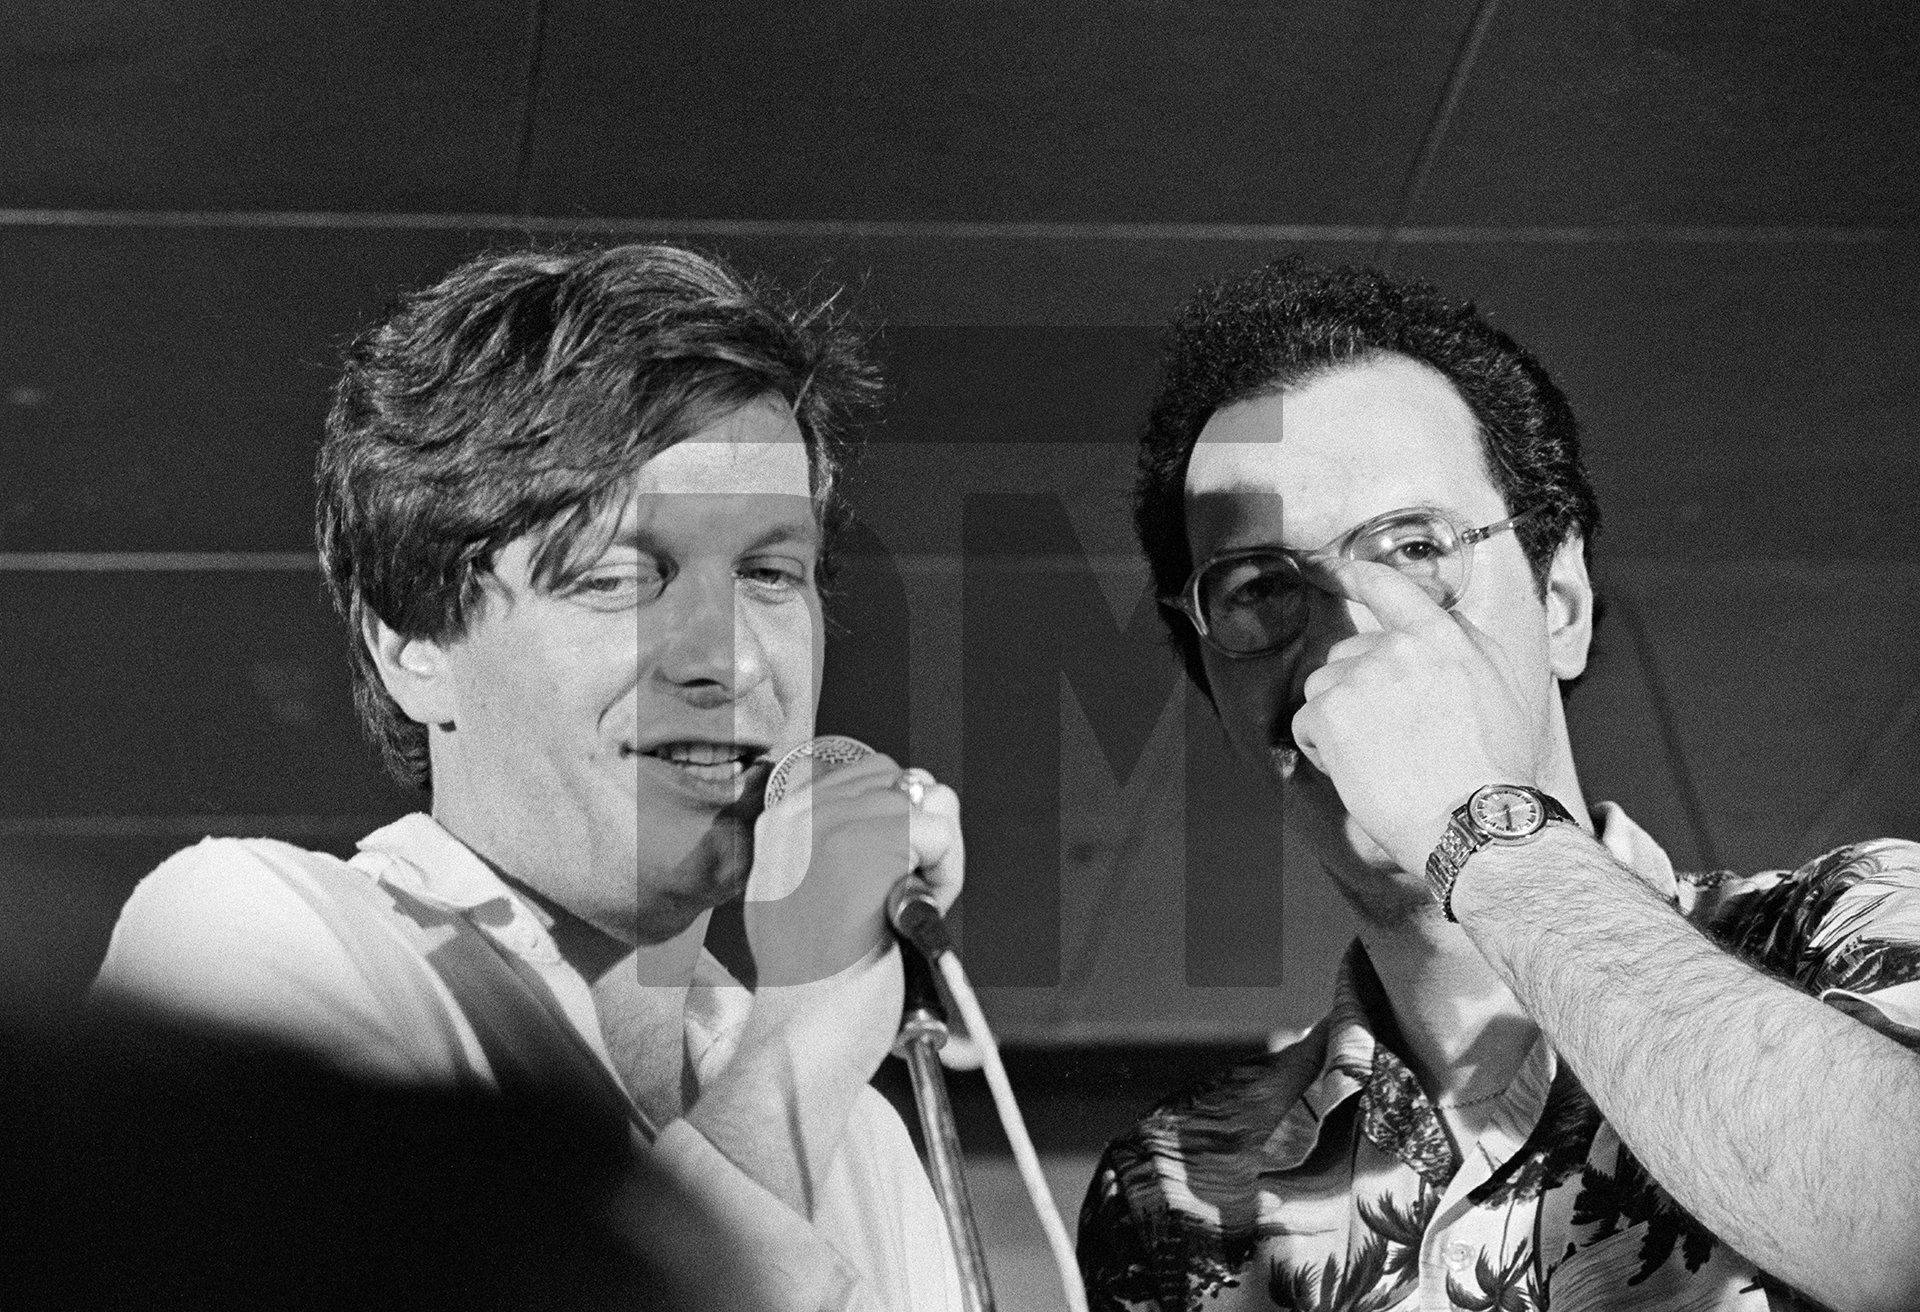 Tony Wilson and club promoter Alan Wise, at the Russell Club, Hulme, for a ‘Factory’ night. ‘What’s On’ programme from Granada TV on location. April 1979 by Daniel Meadows